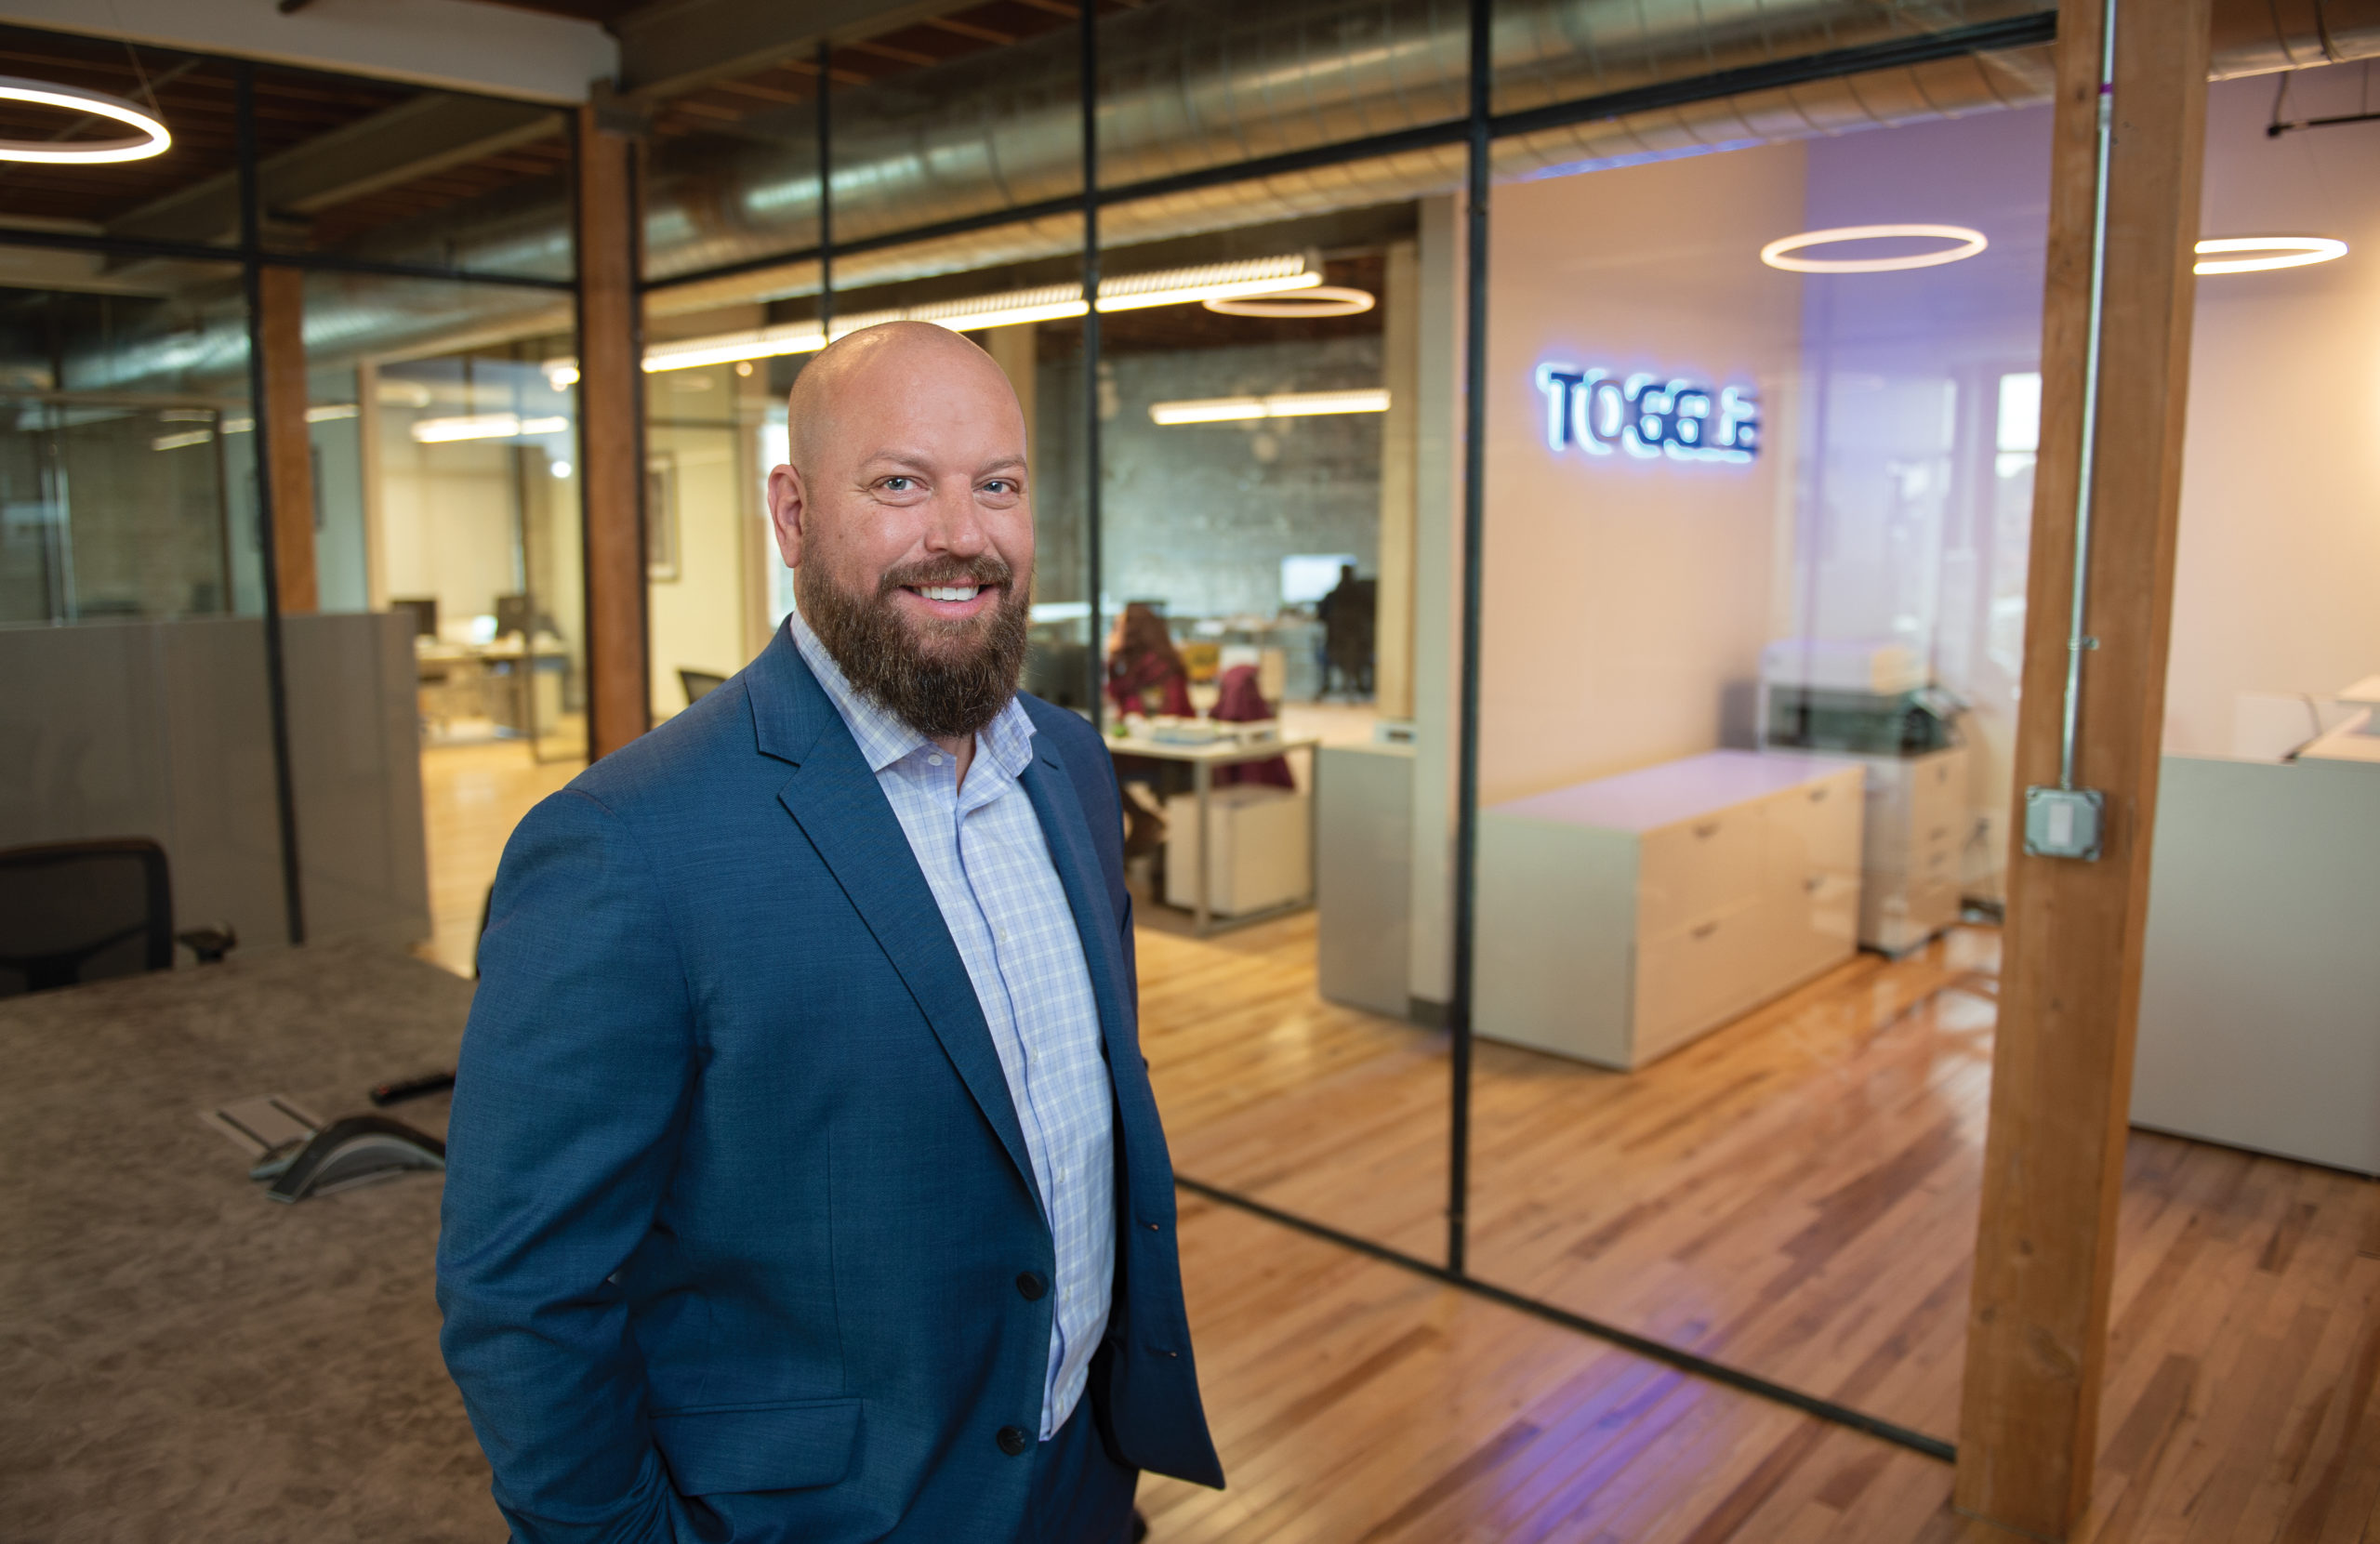 Toggle aims to build a more efficient supply chain focused on independent trucking